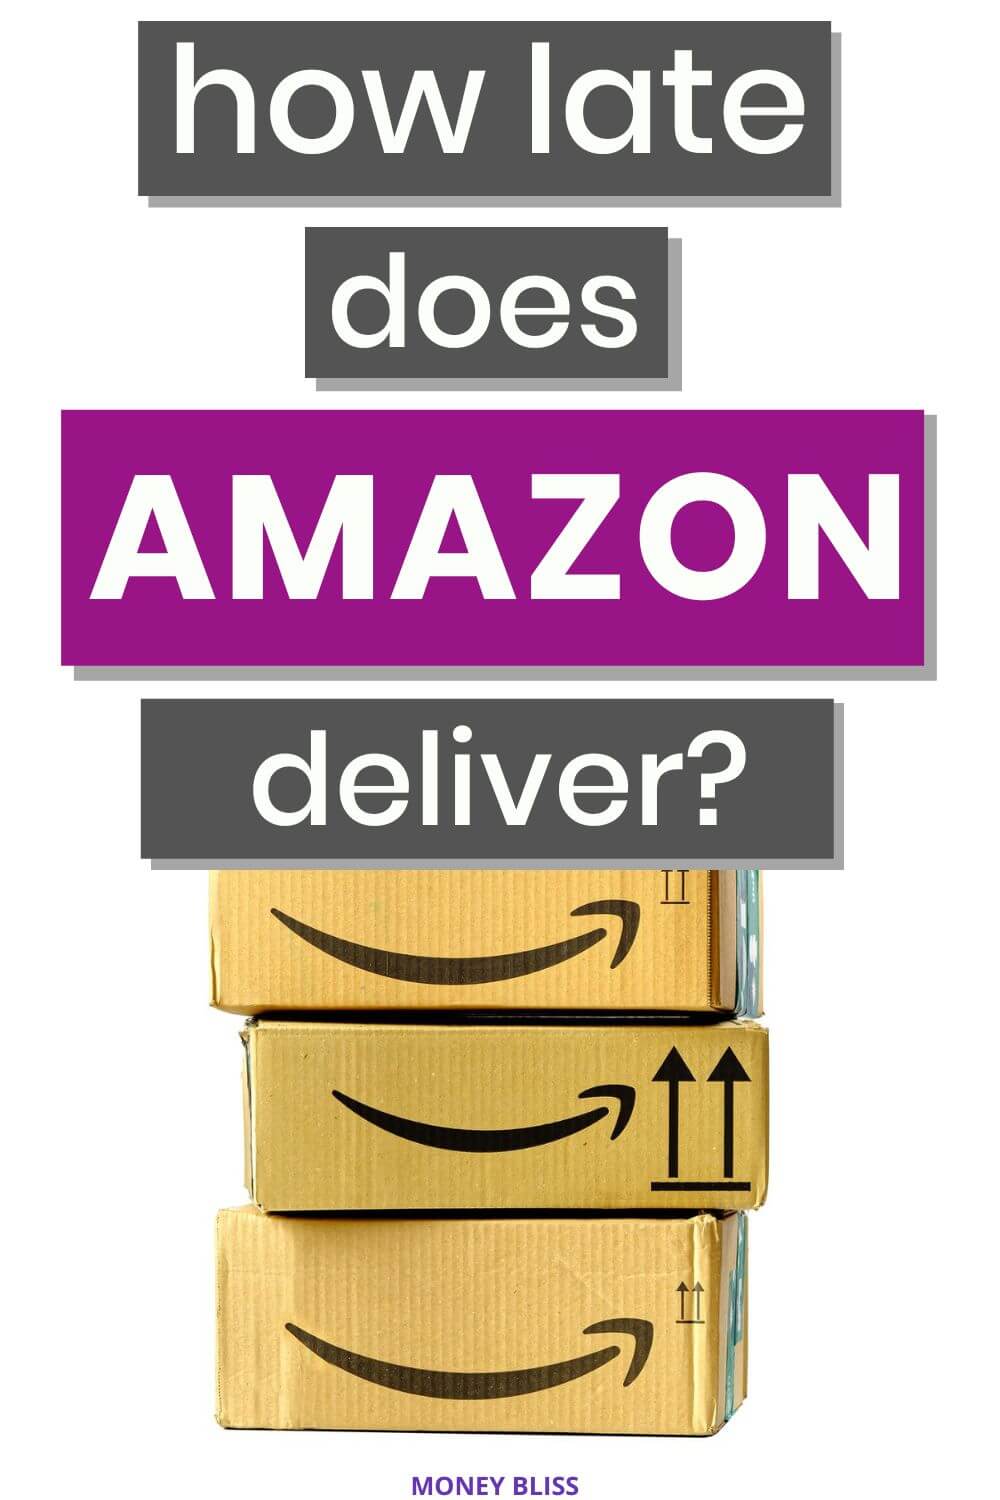 Amazon is known for its impressive shipping times. But how late does amazon deliver? Find the current days and times.